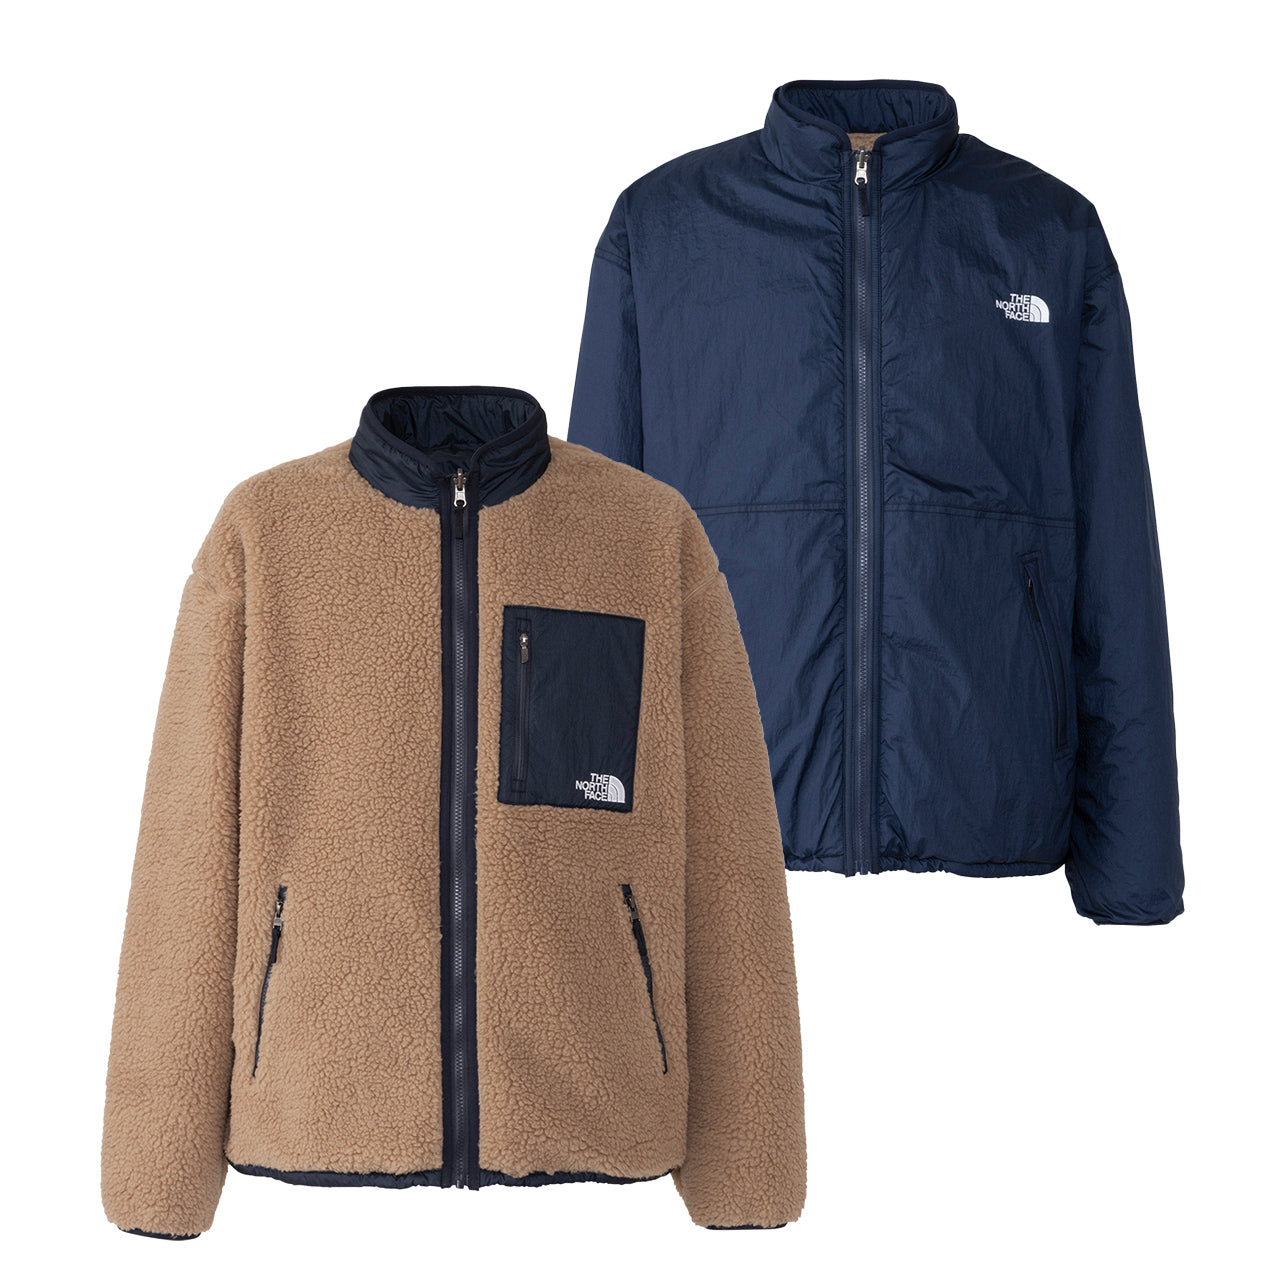 XL The North Face EXTREME PILE ZIP